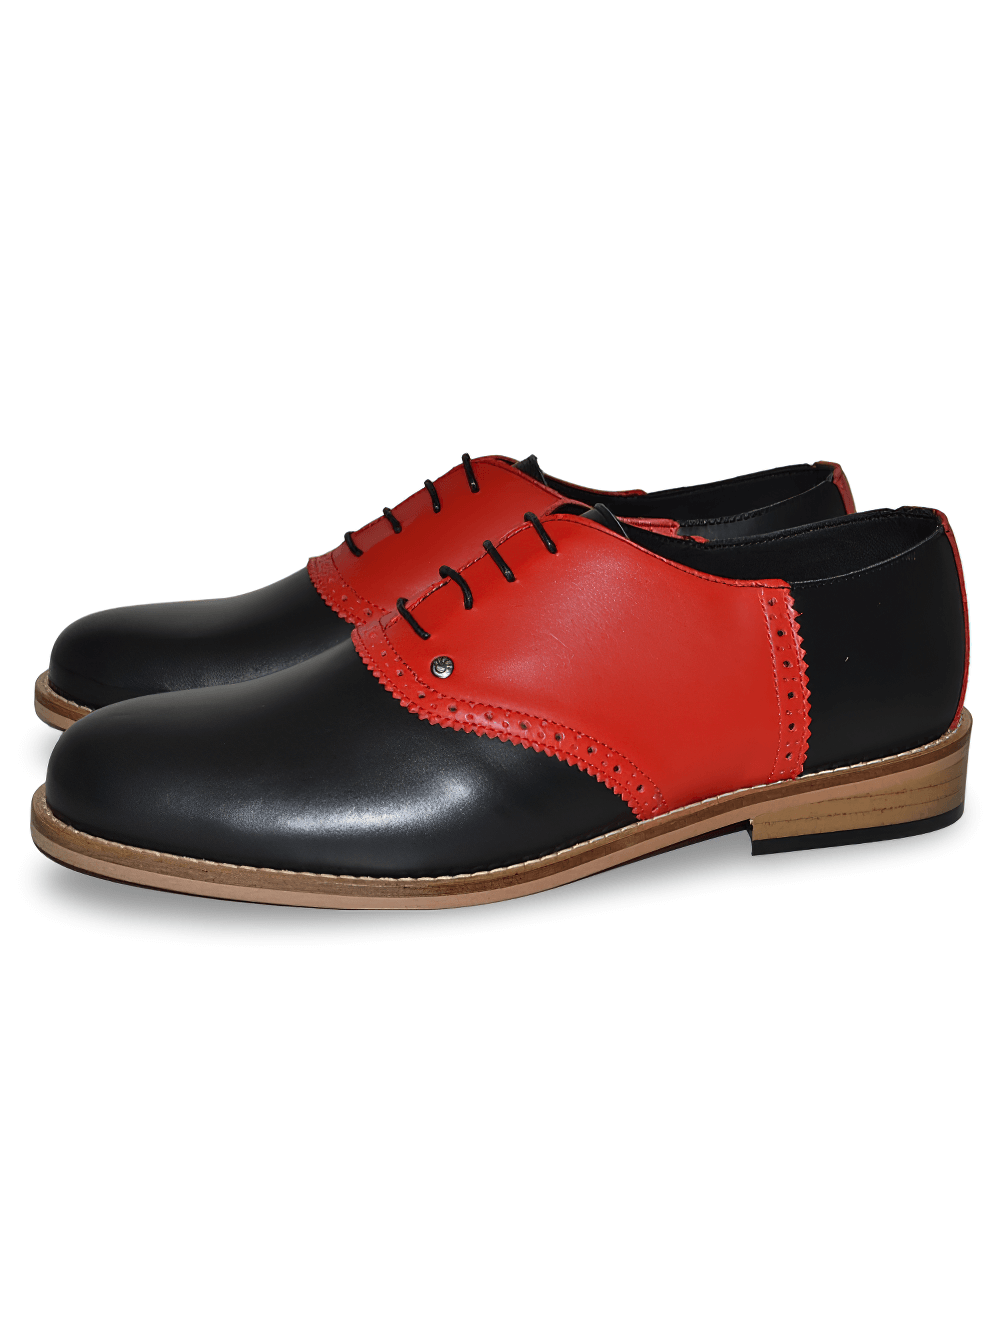 Red and Black Grained Leather Lace-Up Bowling Shoes